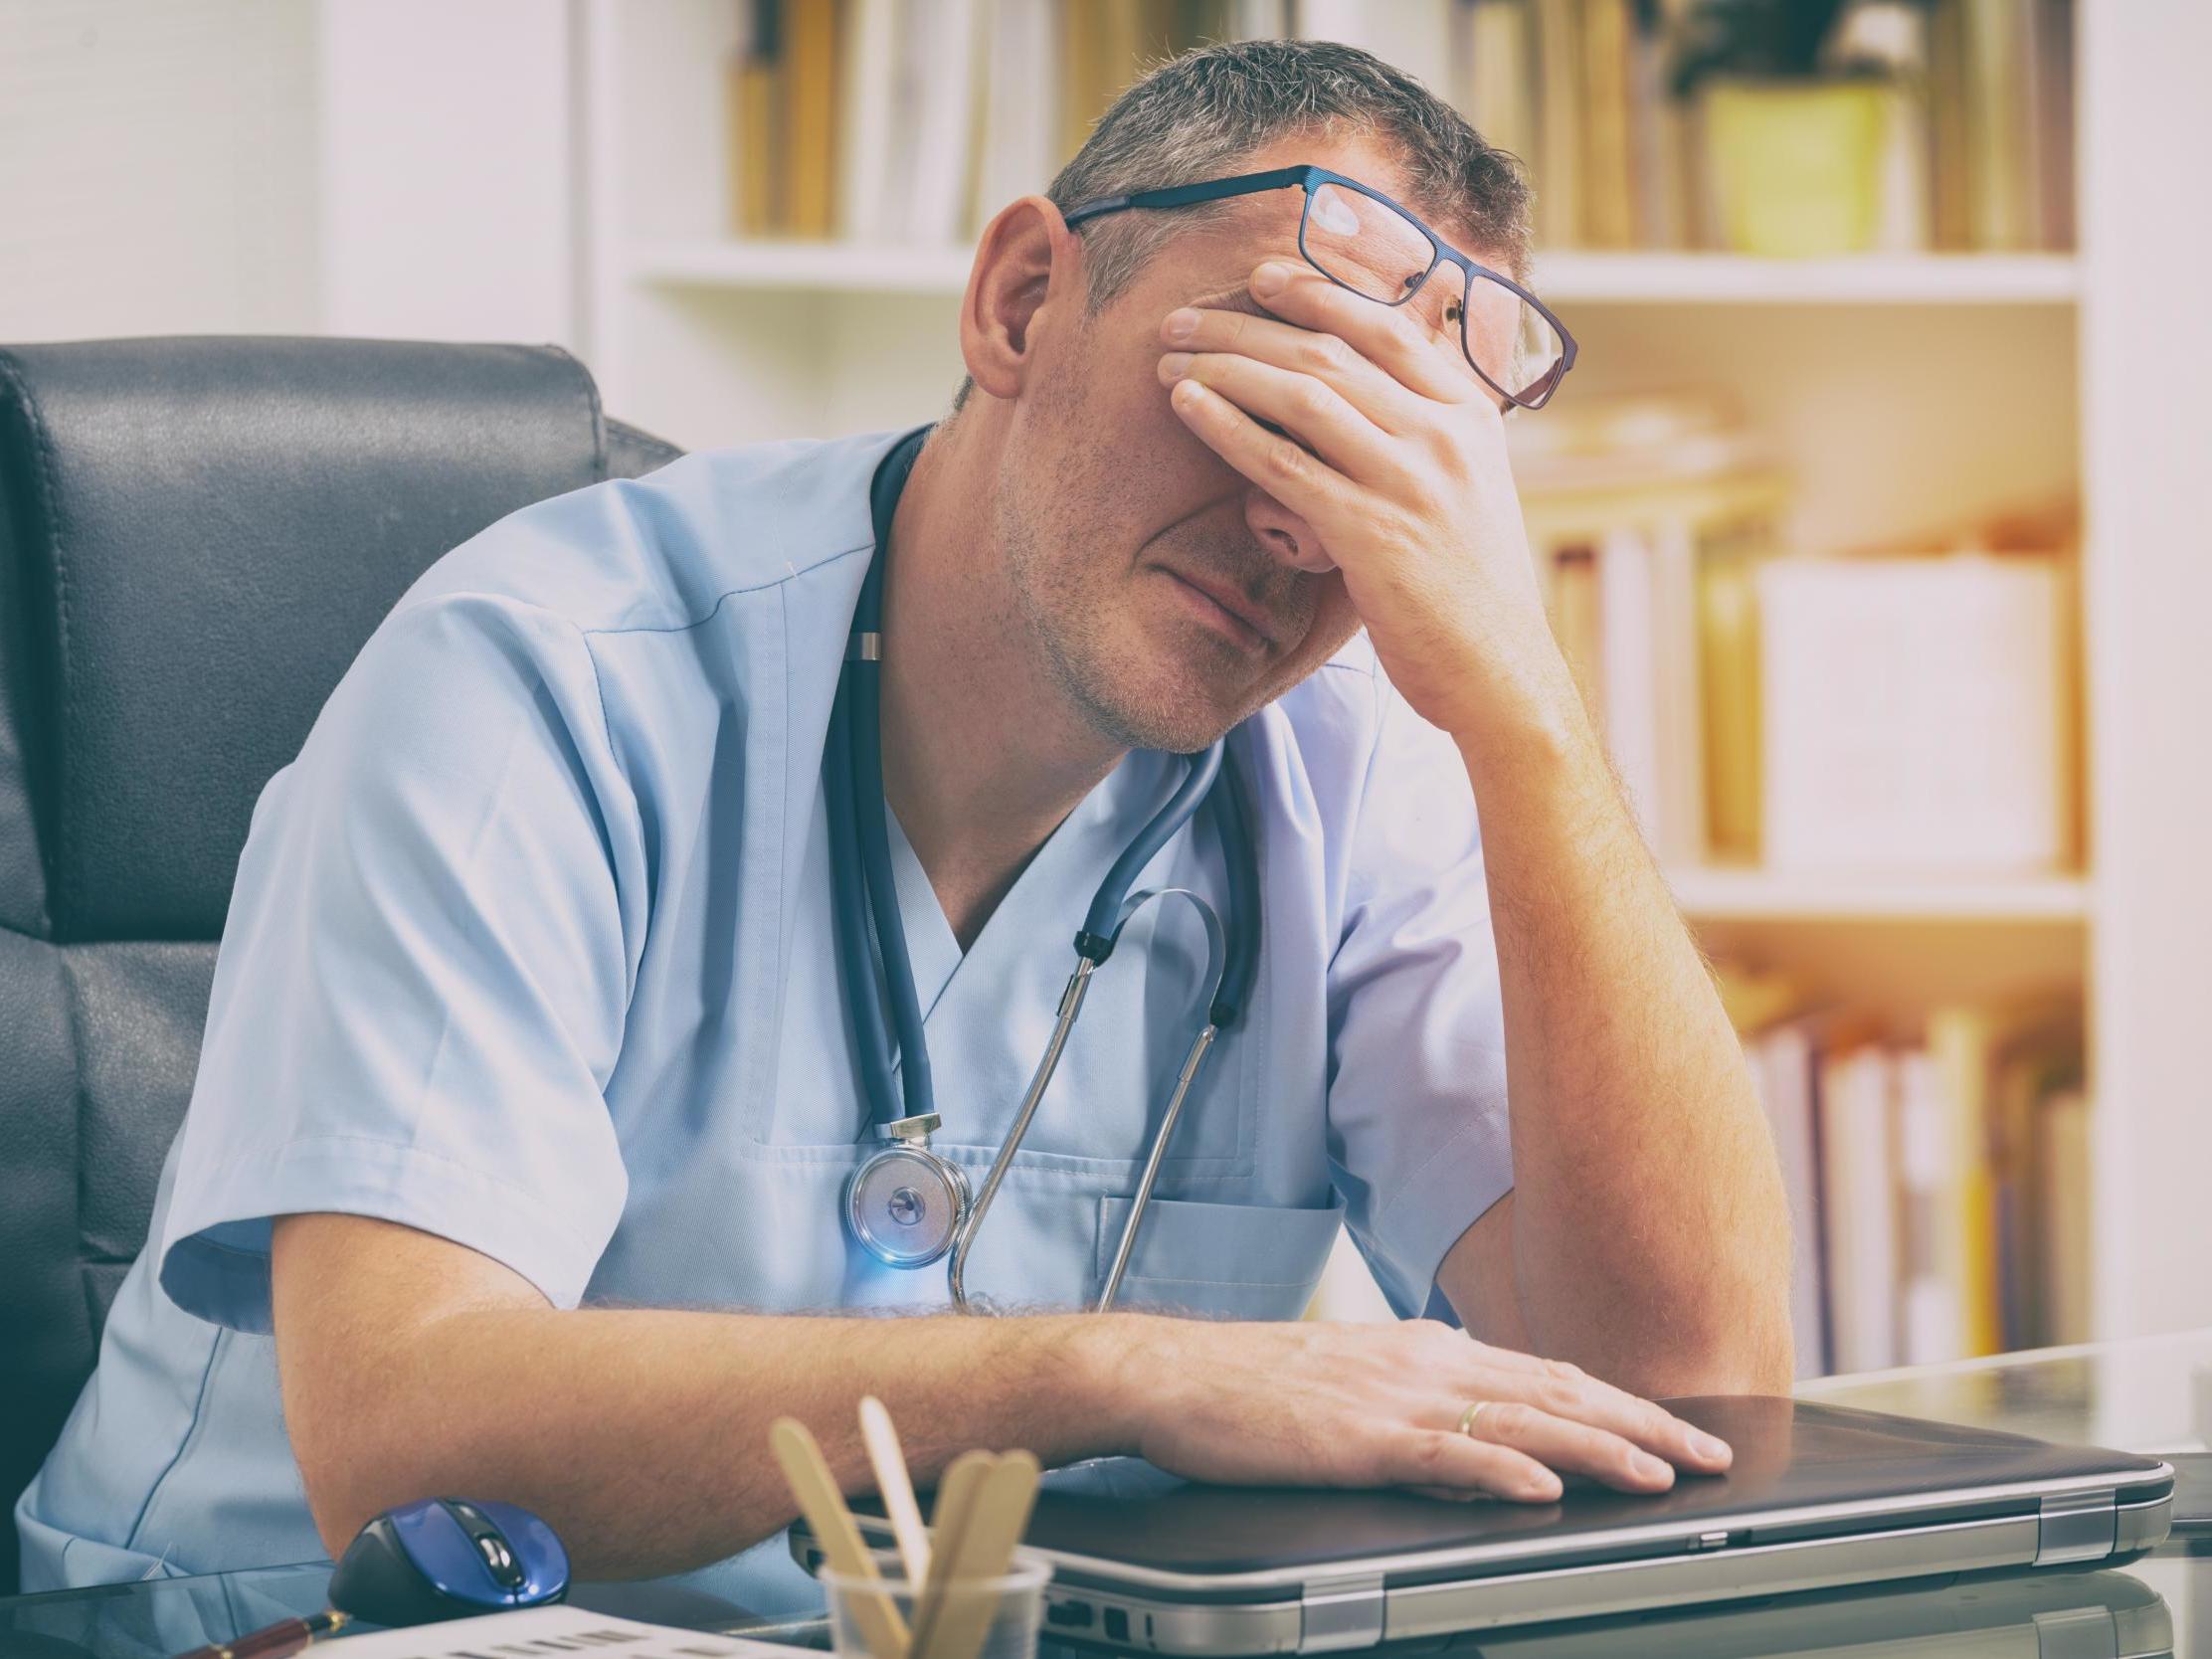 Doctors say they are overworked